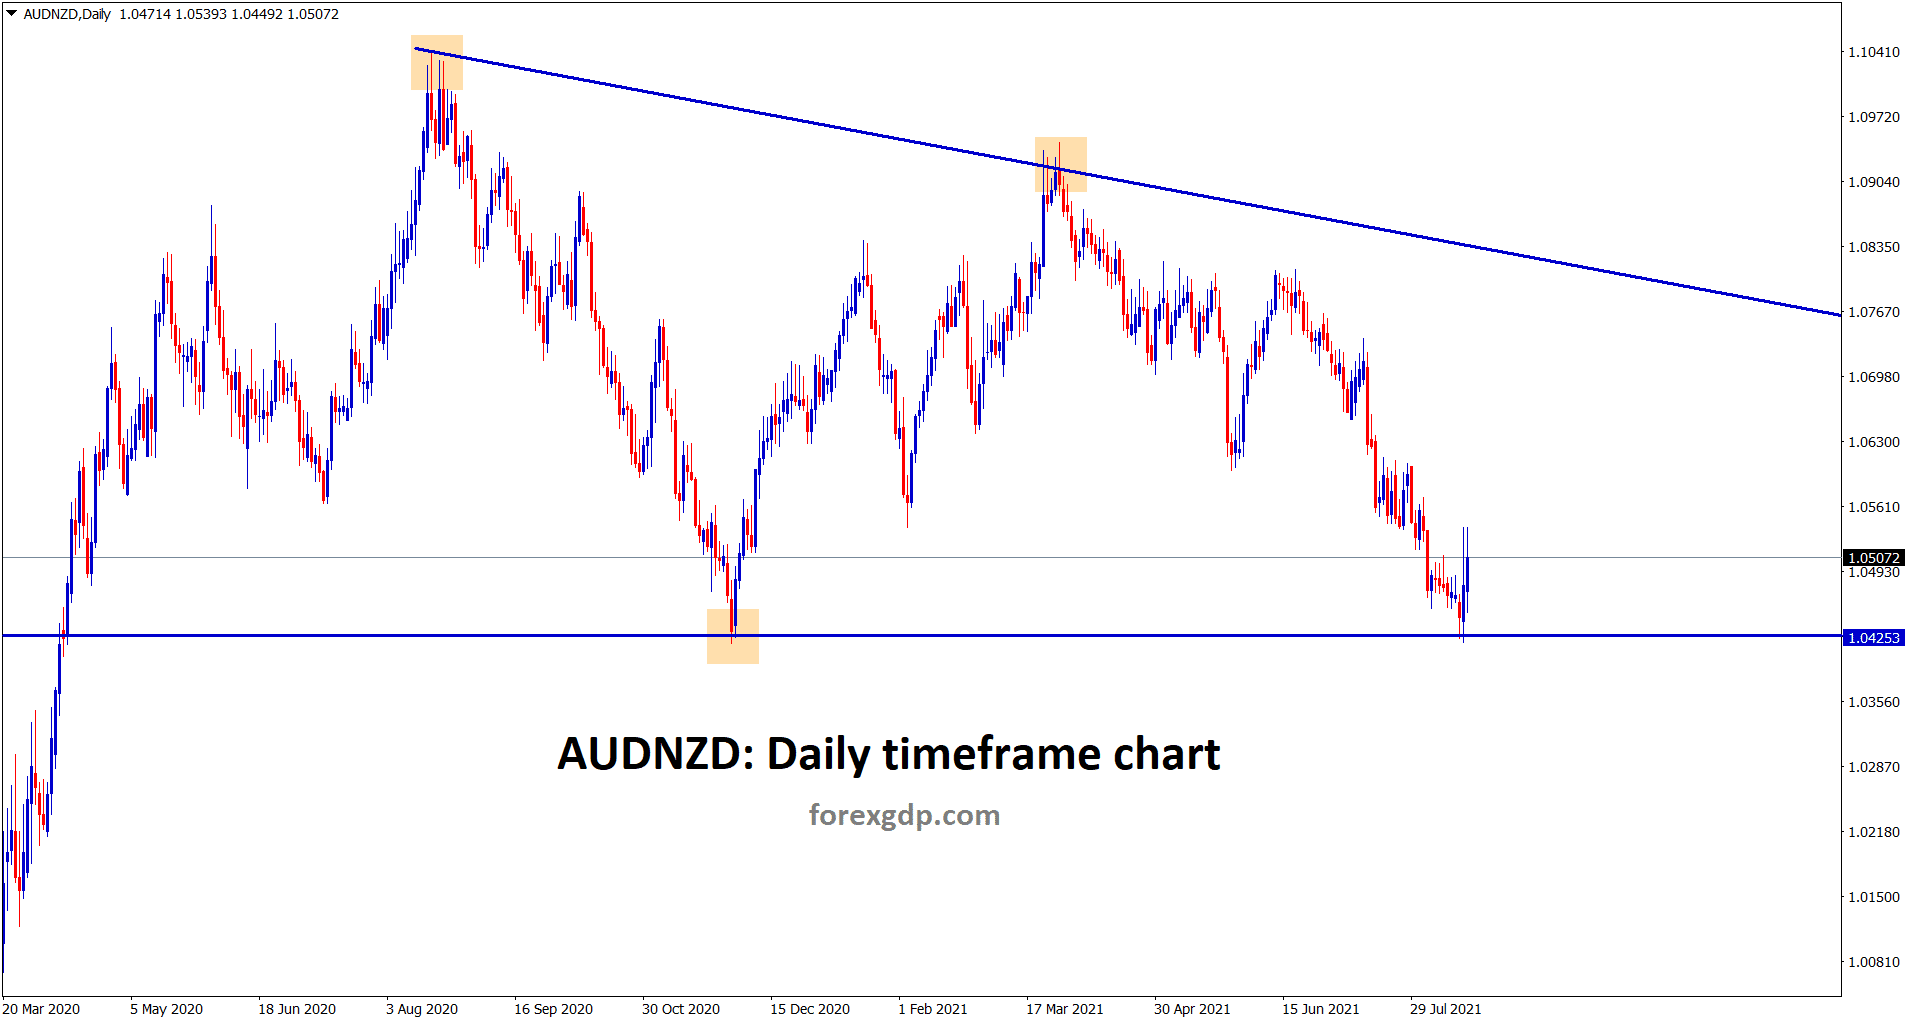 AUDNZD bounced back little up from the support area of the descending triangle